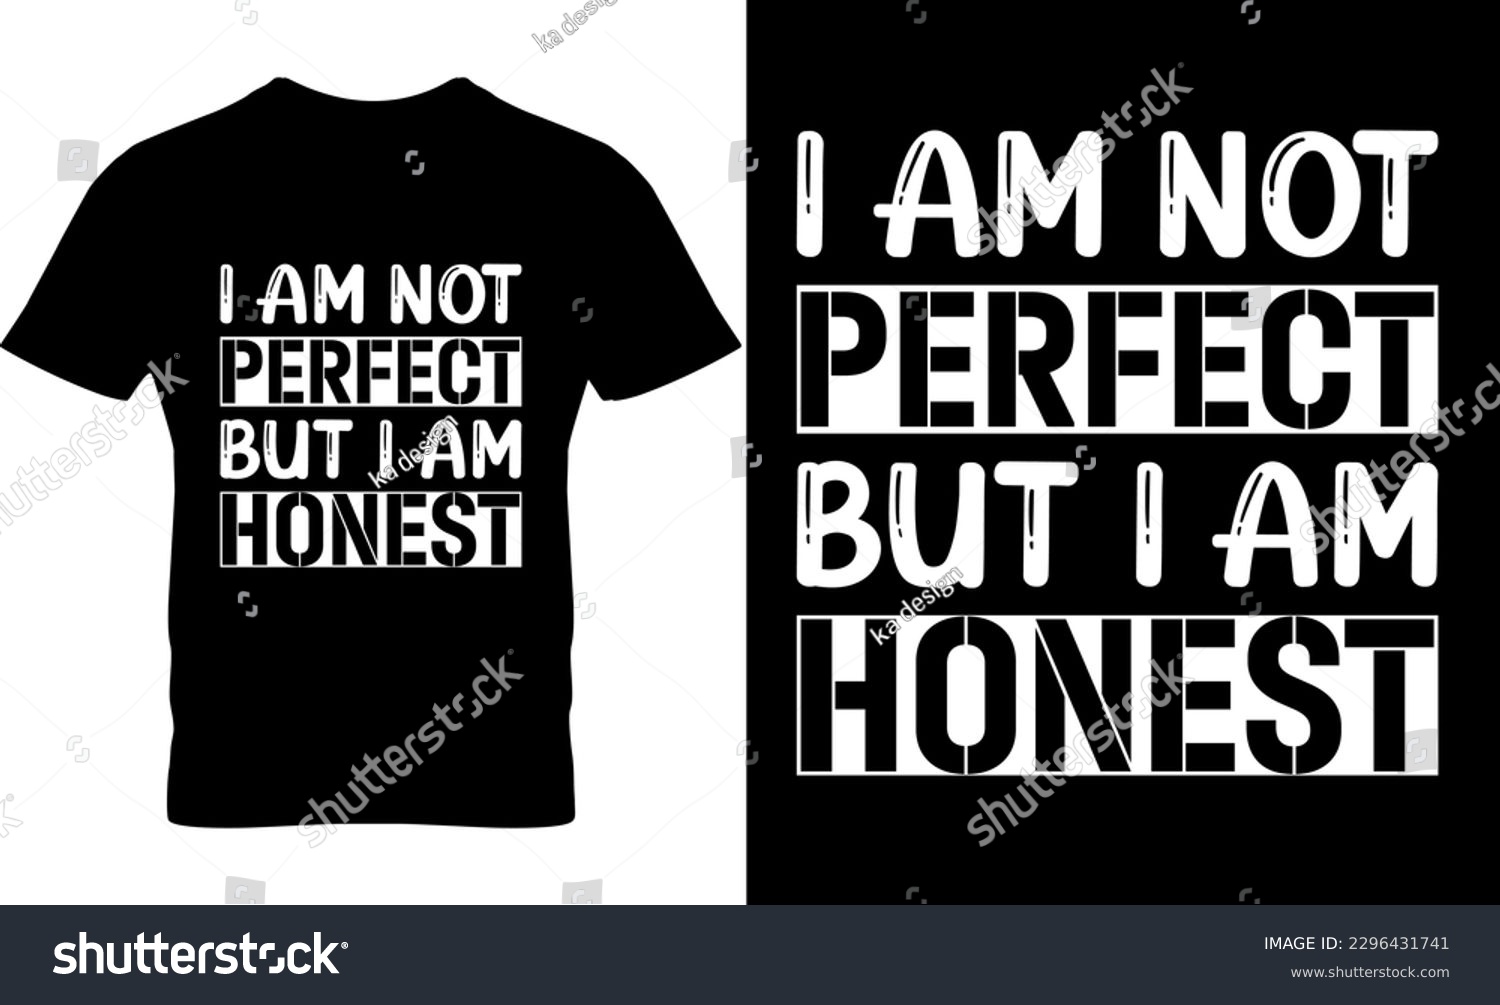 SVG of i am not perfect but i am honest, Graphic, illustration, vector, typography, motivational, inspiration t-shirt design, Typography t-shirt design, motivational quotes, motivational t-shirt design, svg